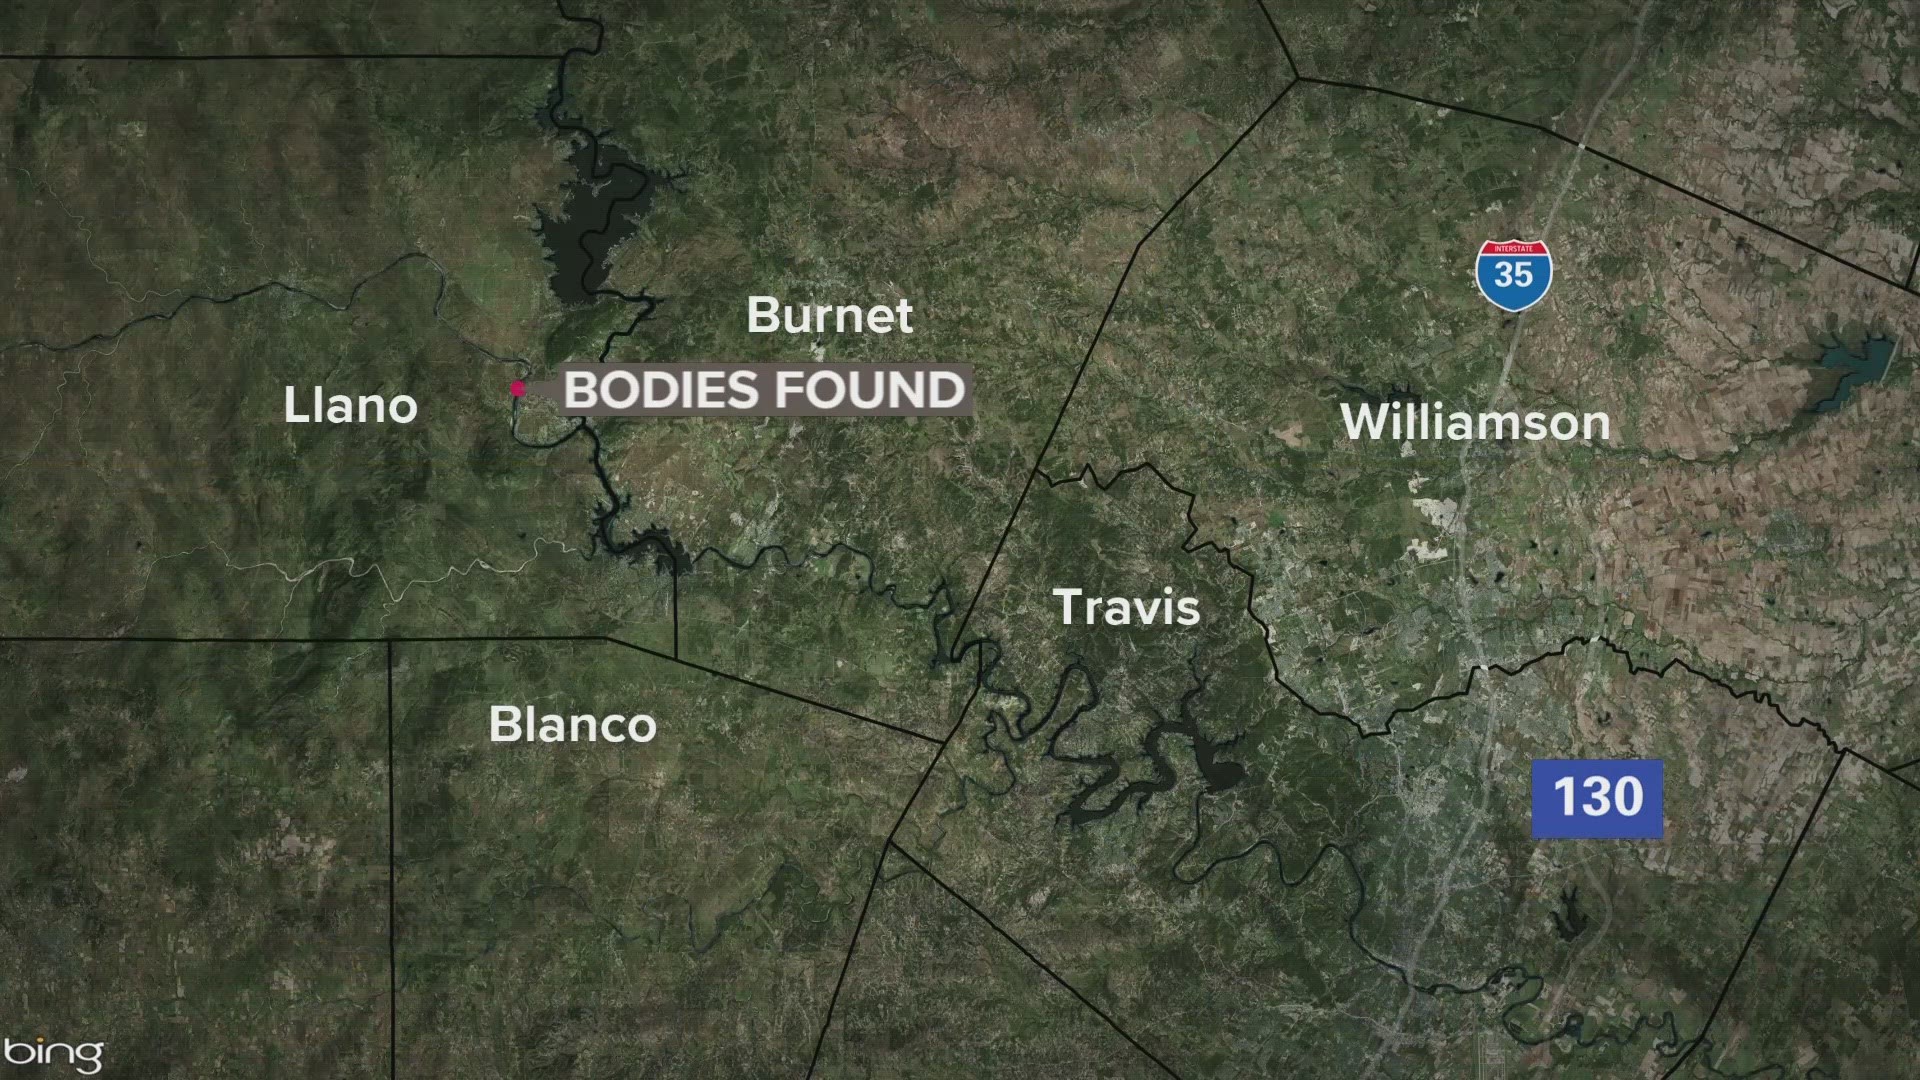 The Llano County Sheriff's Office is investigating the deaths of two people as homicides.